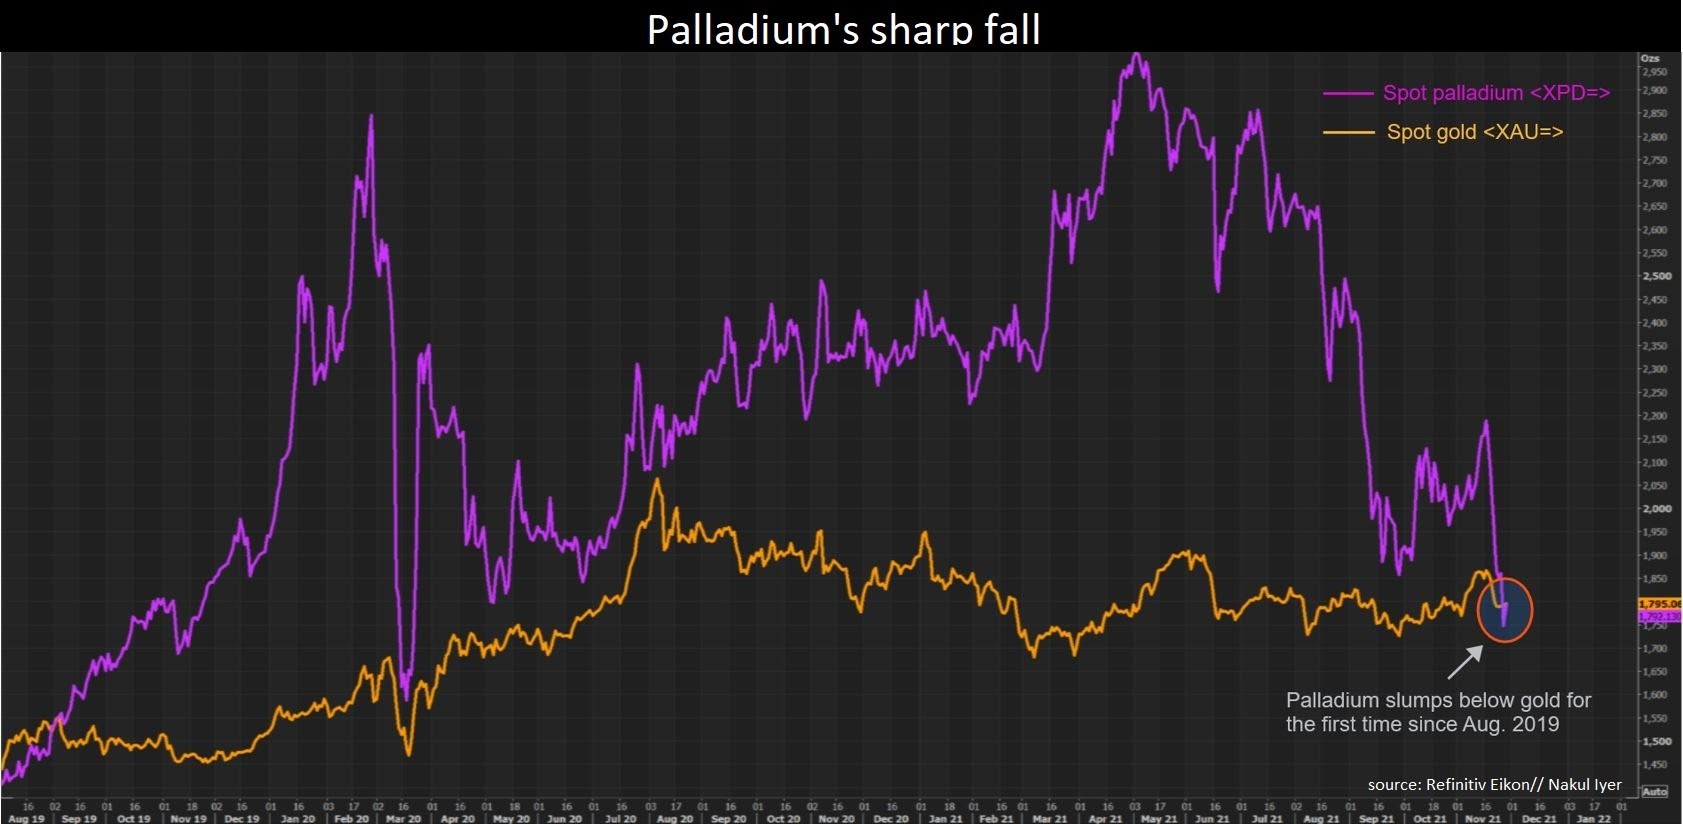 Palladium slumps below gold for the first time since August 2019